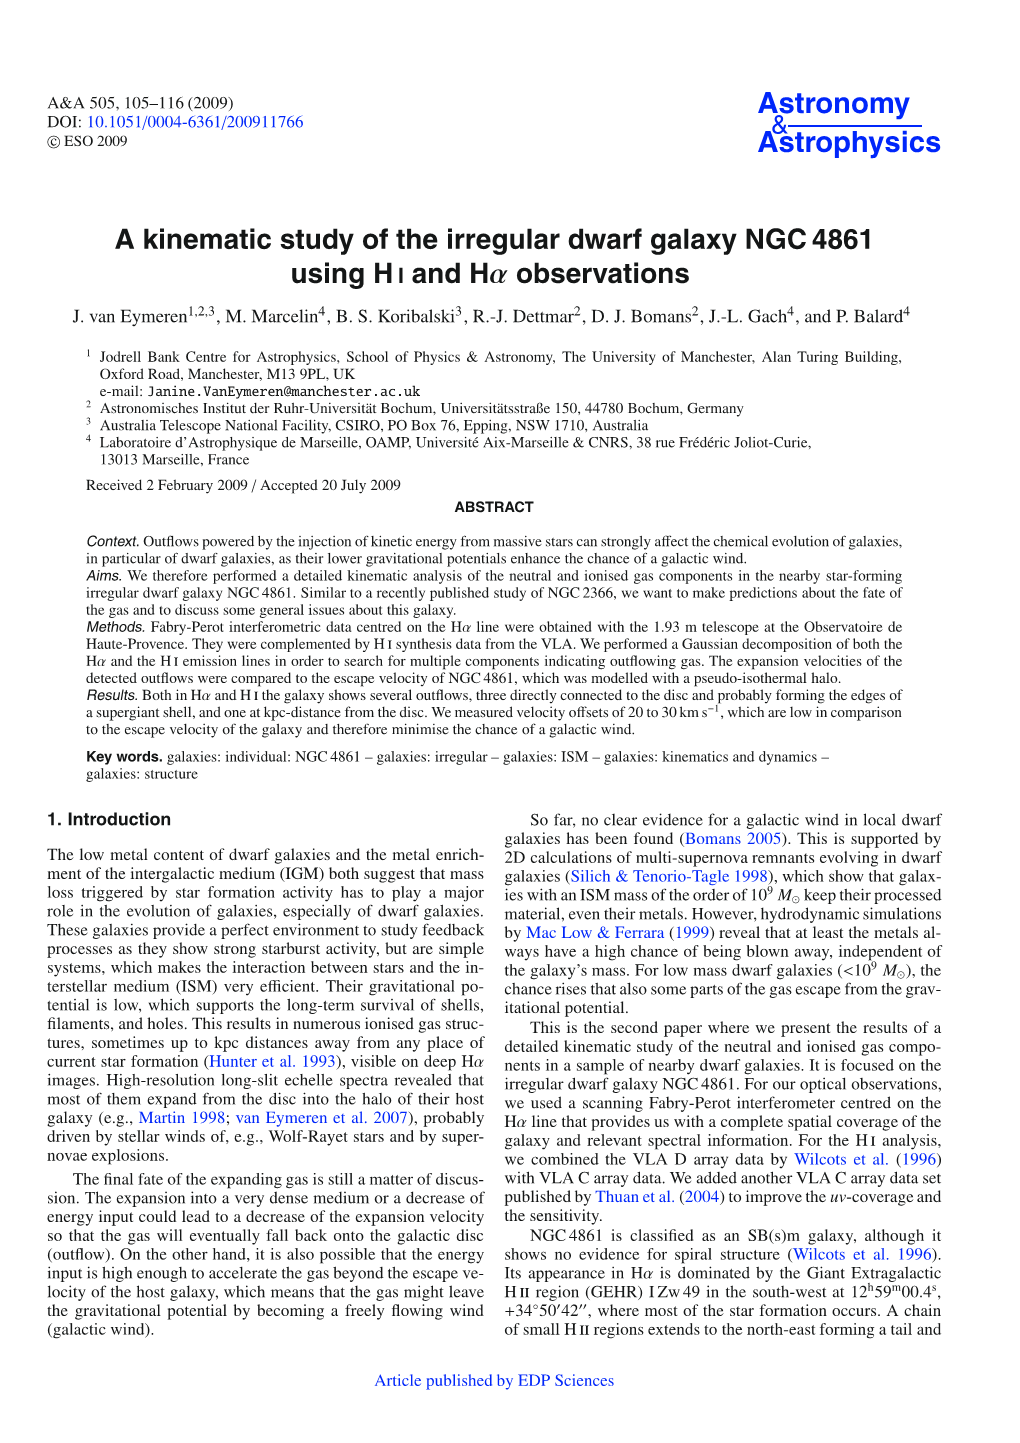 A Kinematic Study of the Irregular Dwarf Galaxy NGC 4861 Using H I and Hα Observations